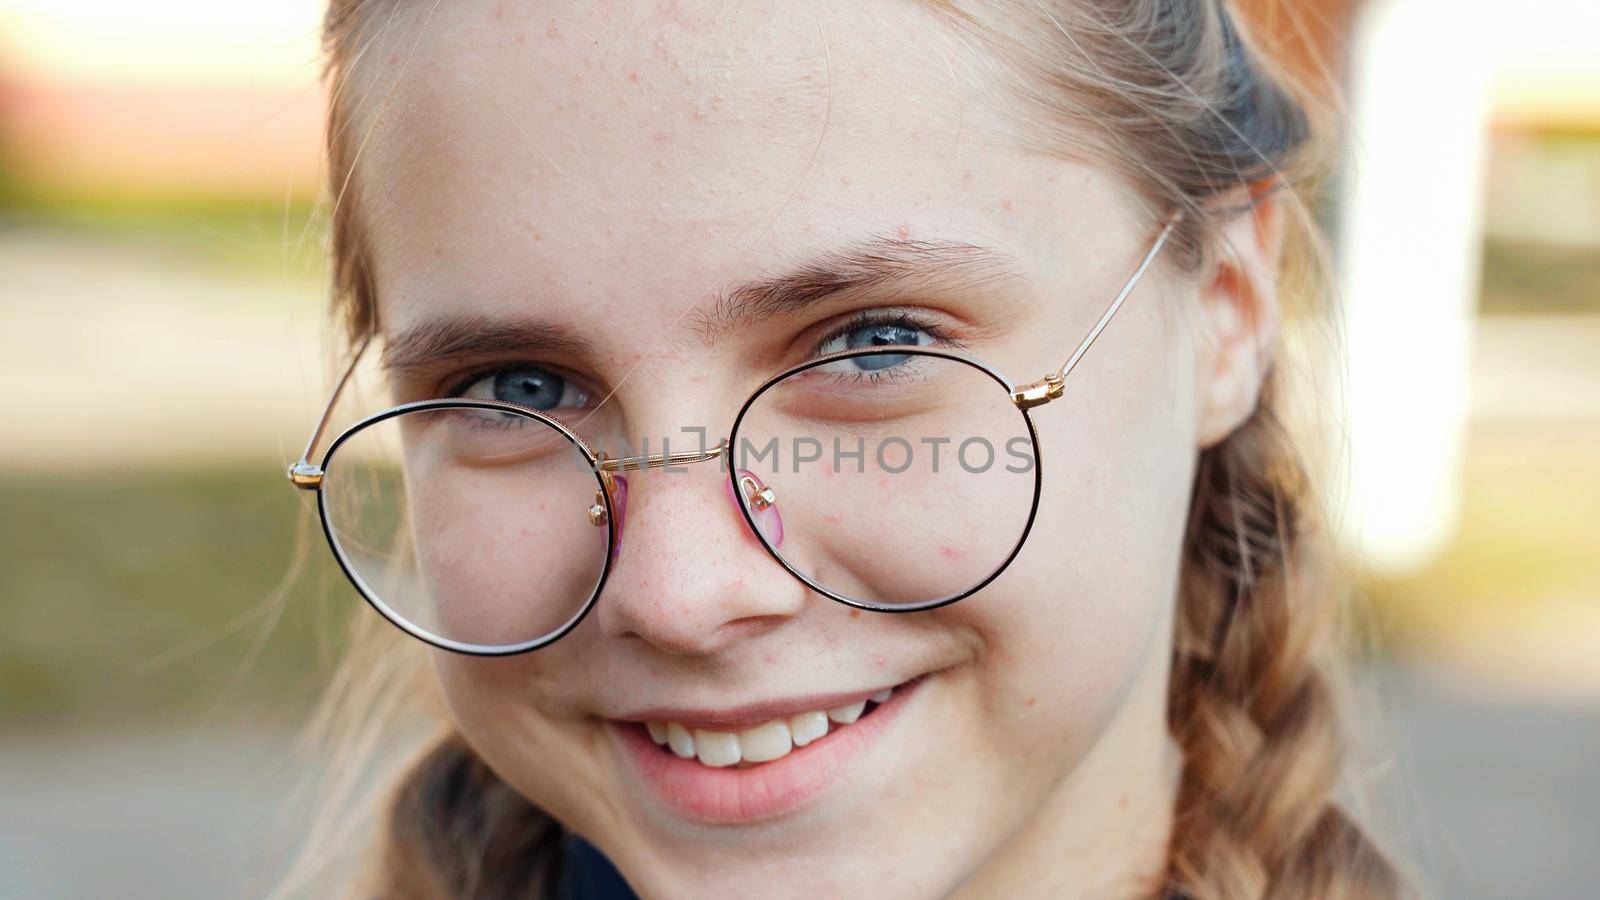 A teenage girl wearing glasses. Close-up of her face